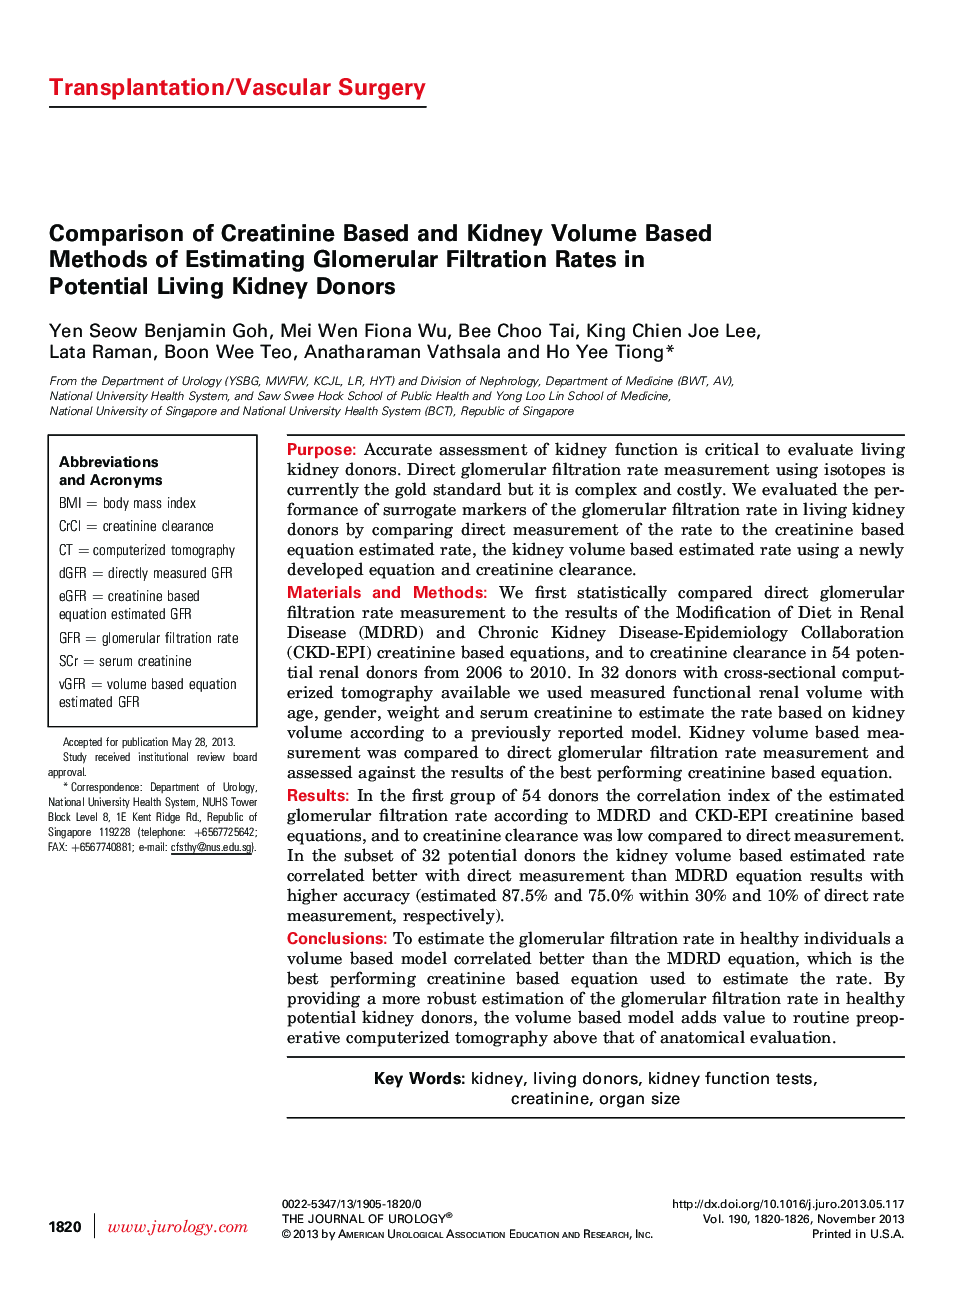 Comparison of Creatinine Based and Kidney Volume Based Methods of Estimating Glomerular Filtration Rates in Potential Living Kidney Donors 